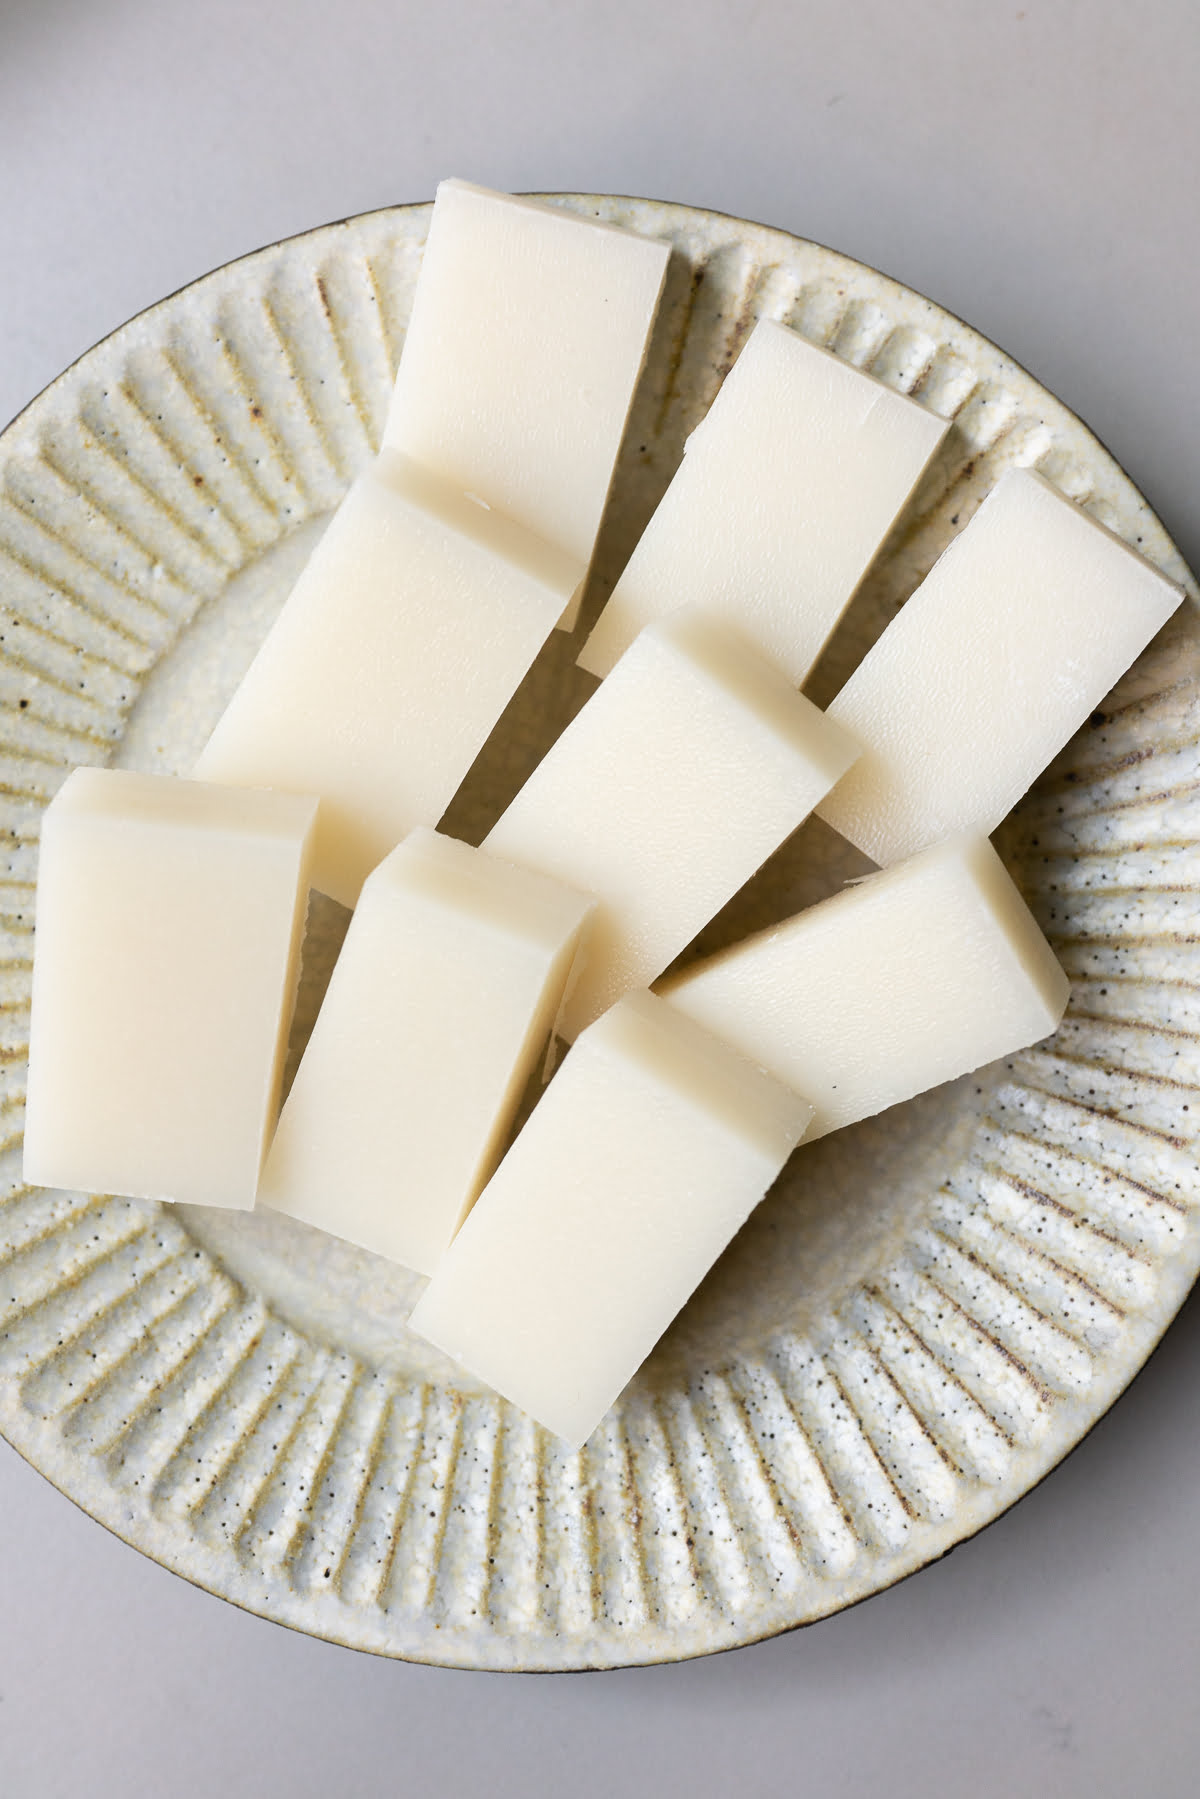 A plate of kirimochi, cut into thirds.